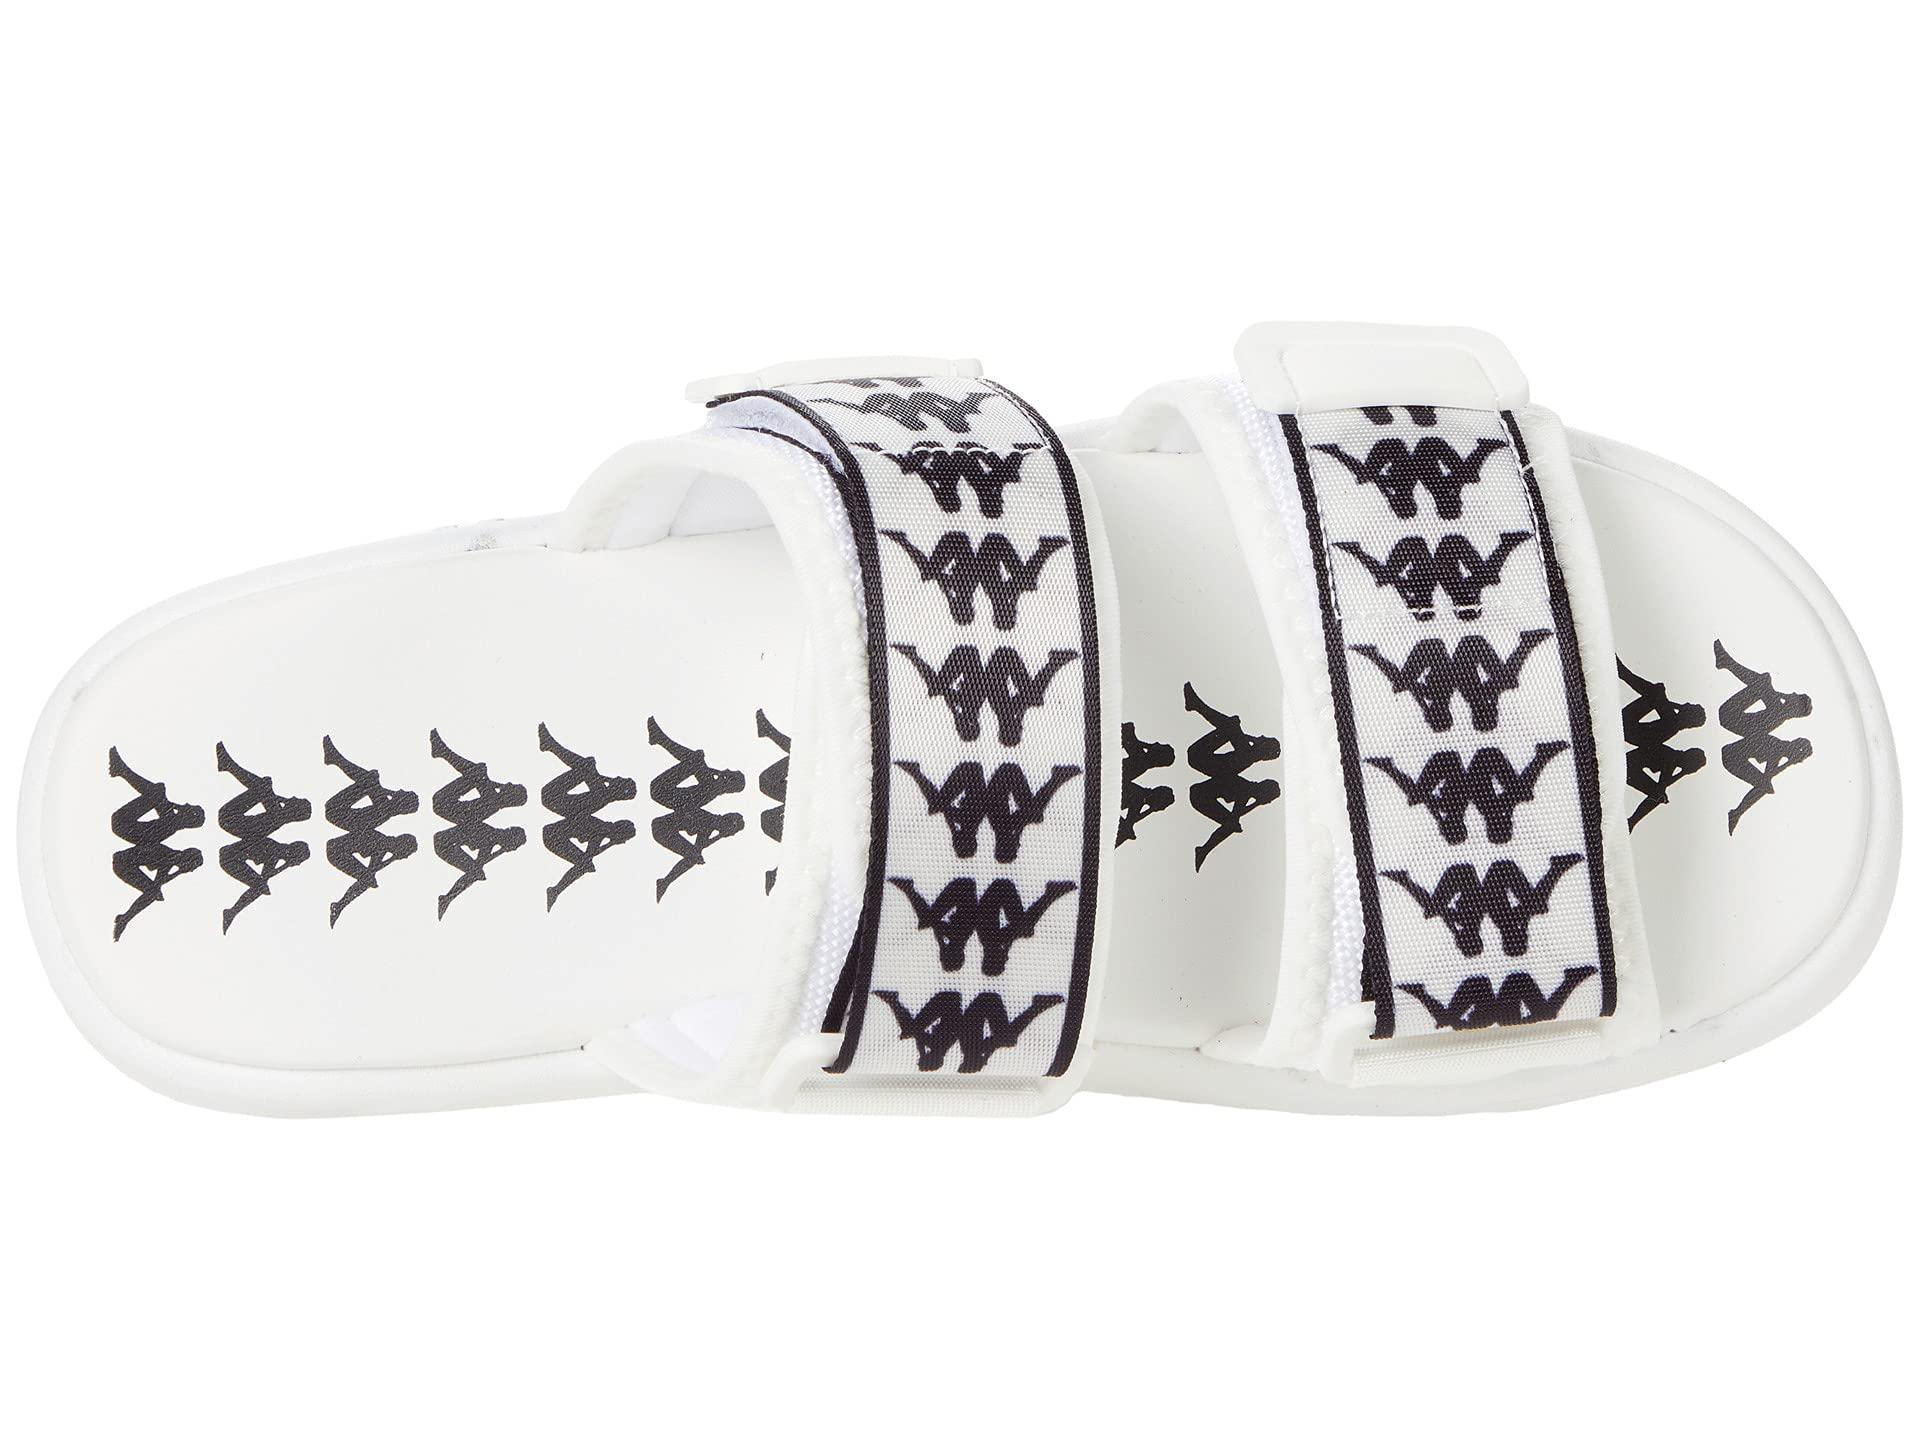 Kappa Synthetic 222 Banda Aster 1 Sandals - Shoes in White Black 